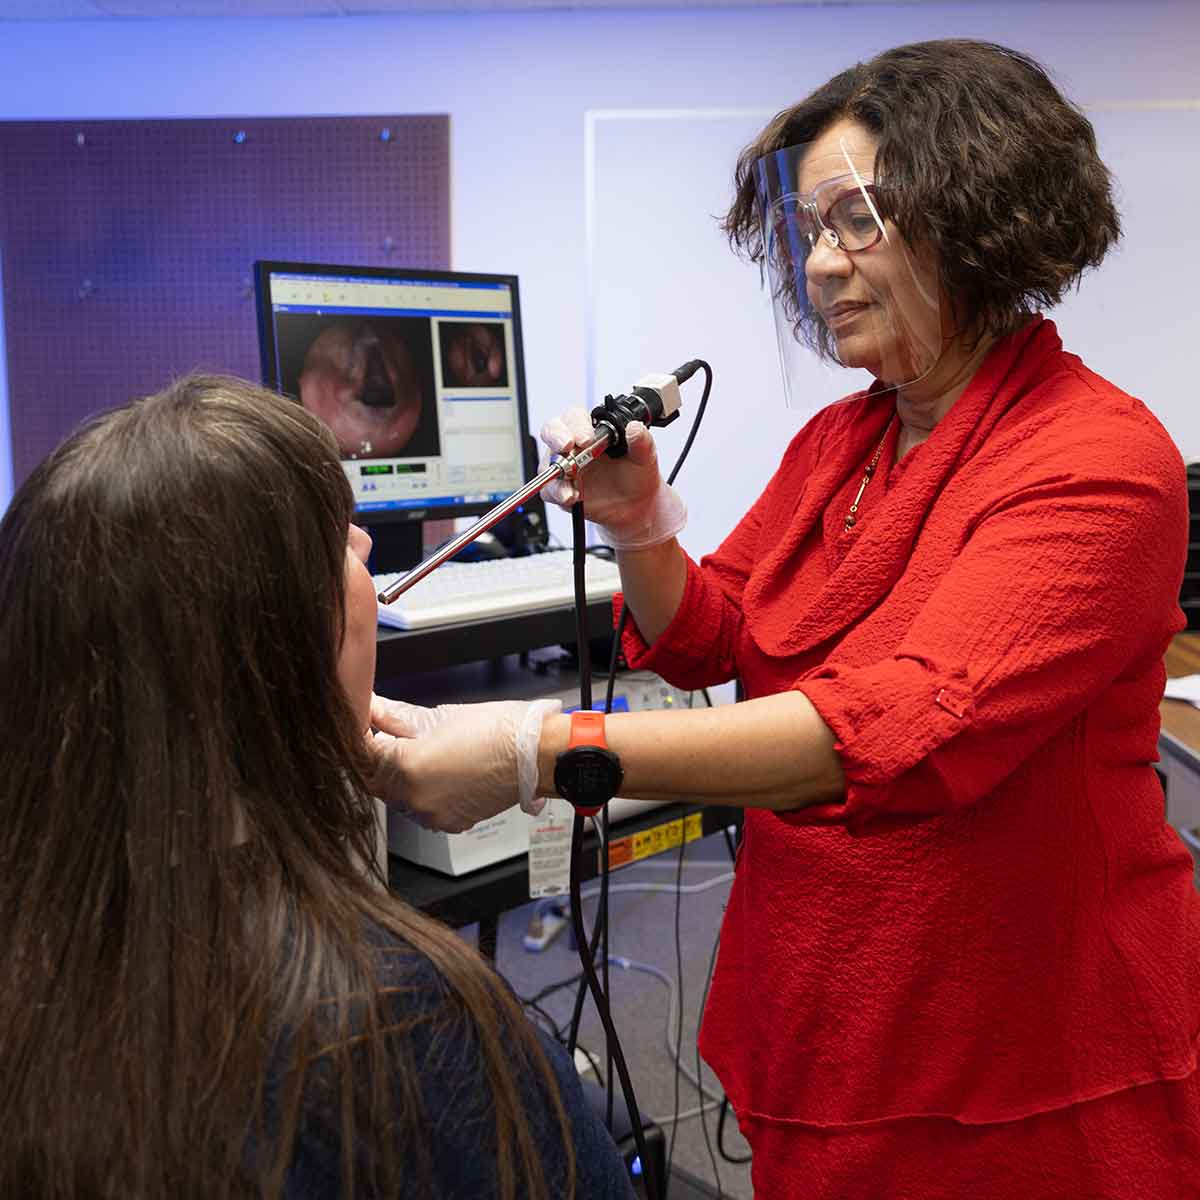 A speech-language pathologist demonstrates how to do a throat scope on a patient.